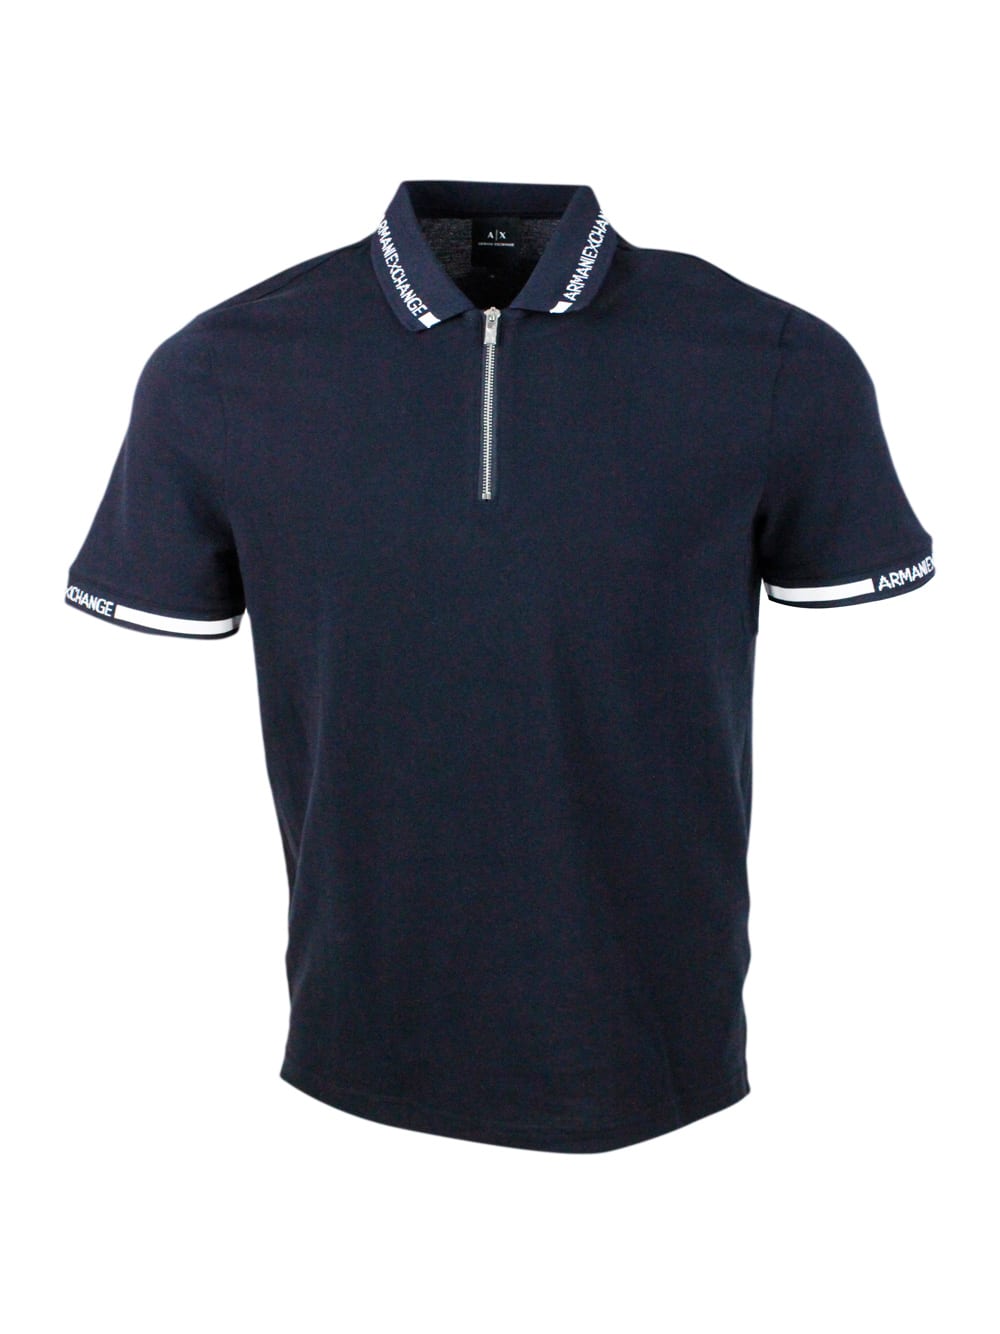 Armani Collezioni Hort-sleeved Pique Cotton Polo Shirt With Zip Closure And Writing On The Collar In Blue